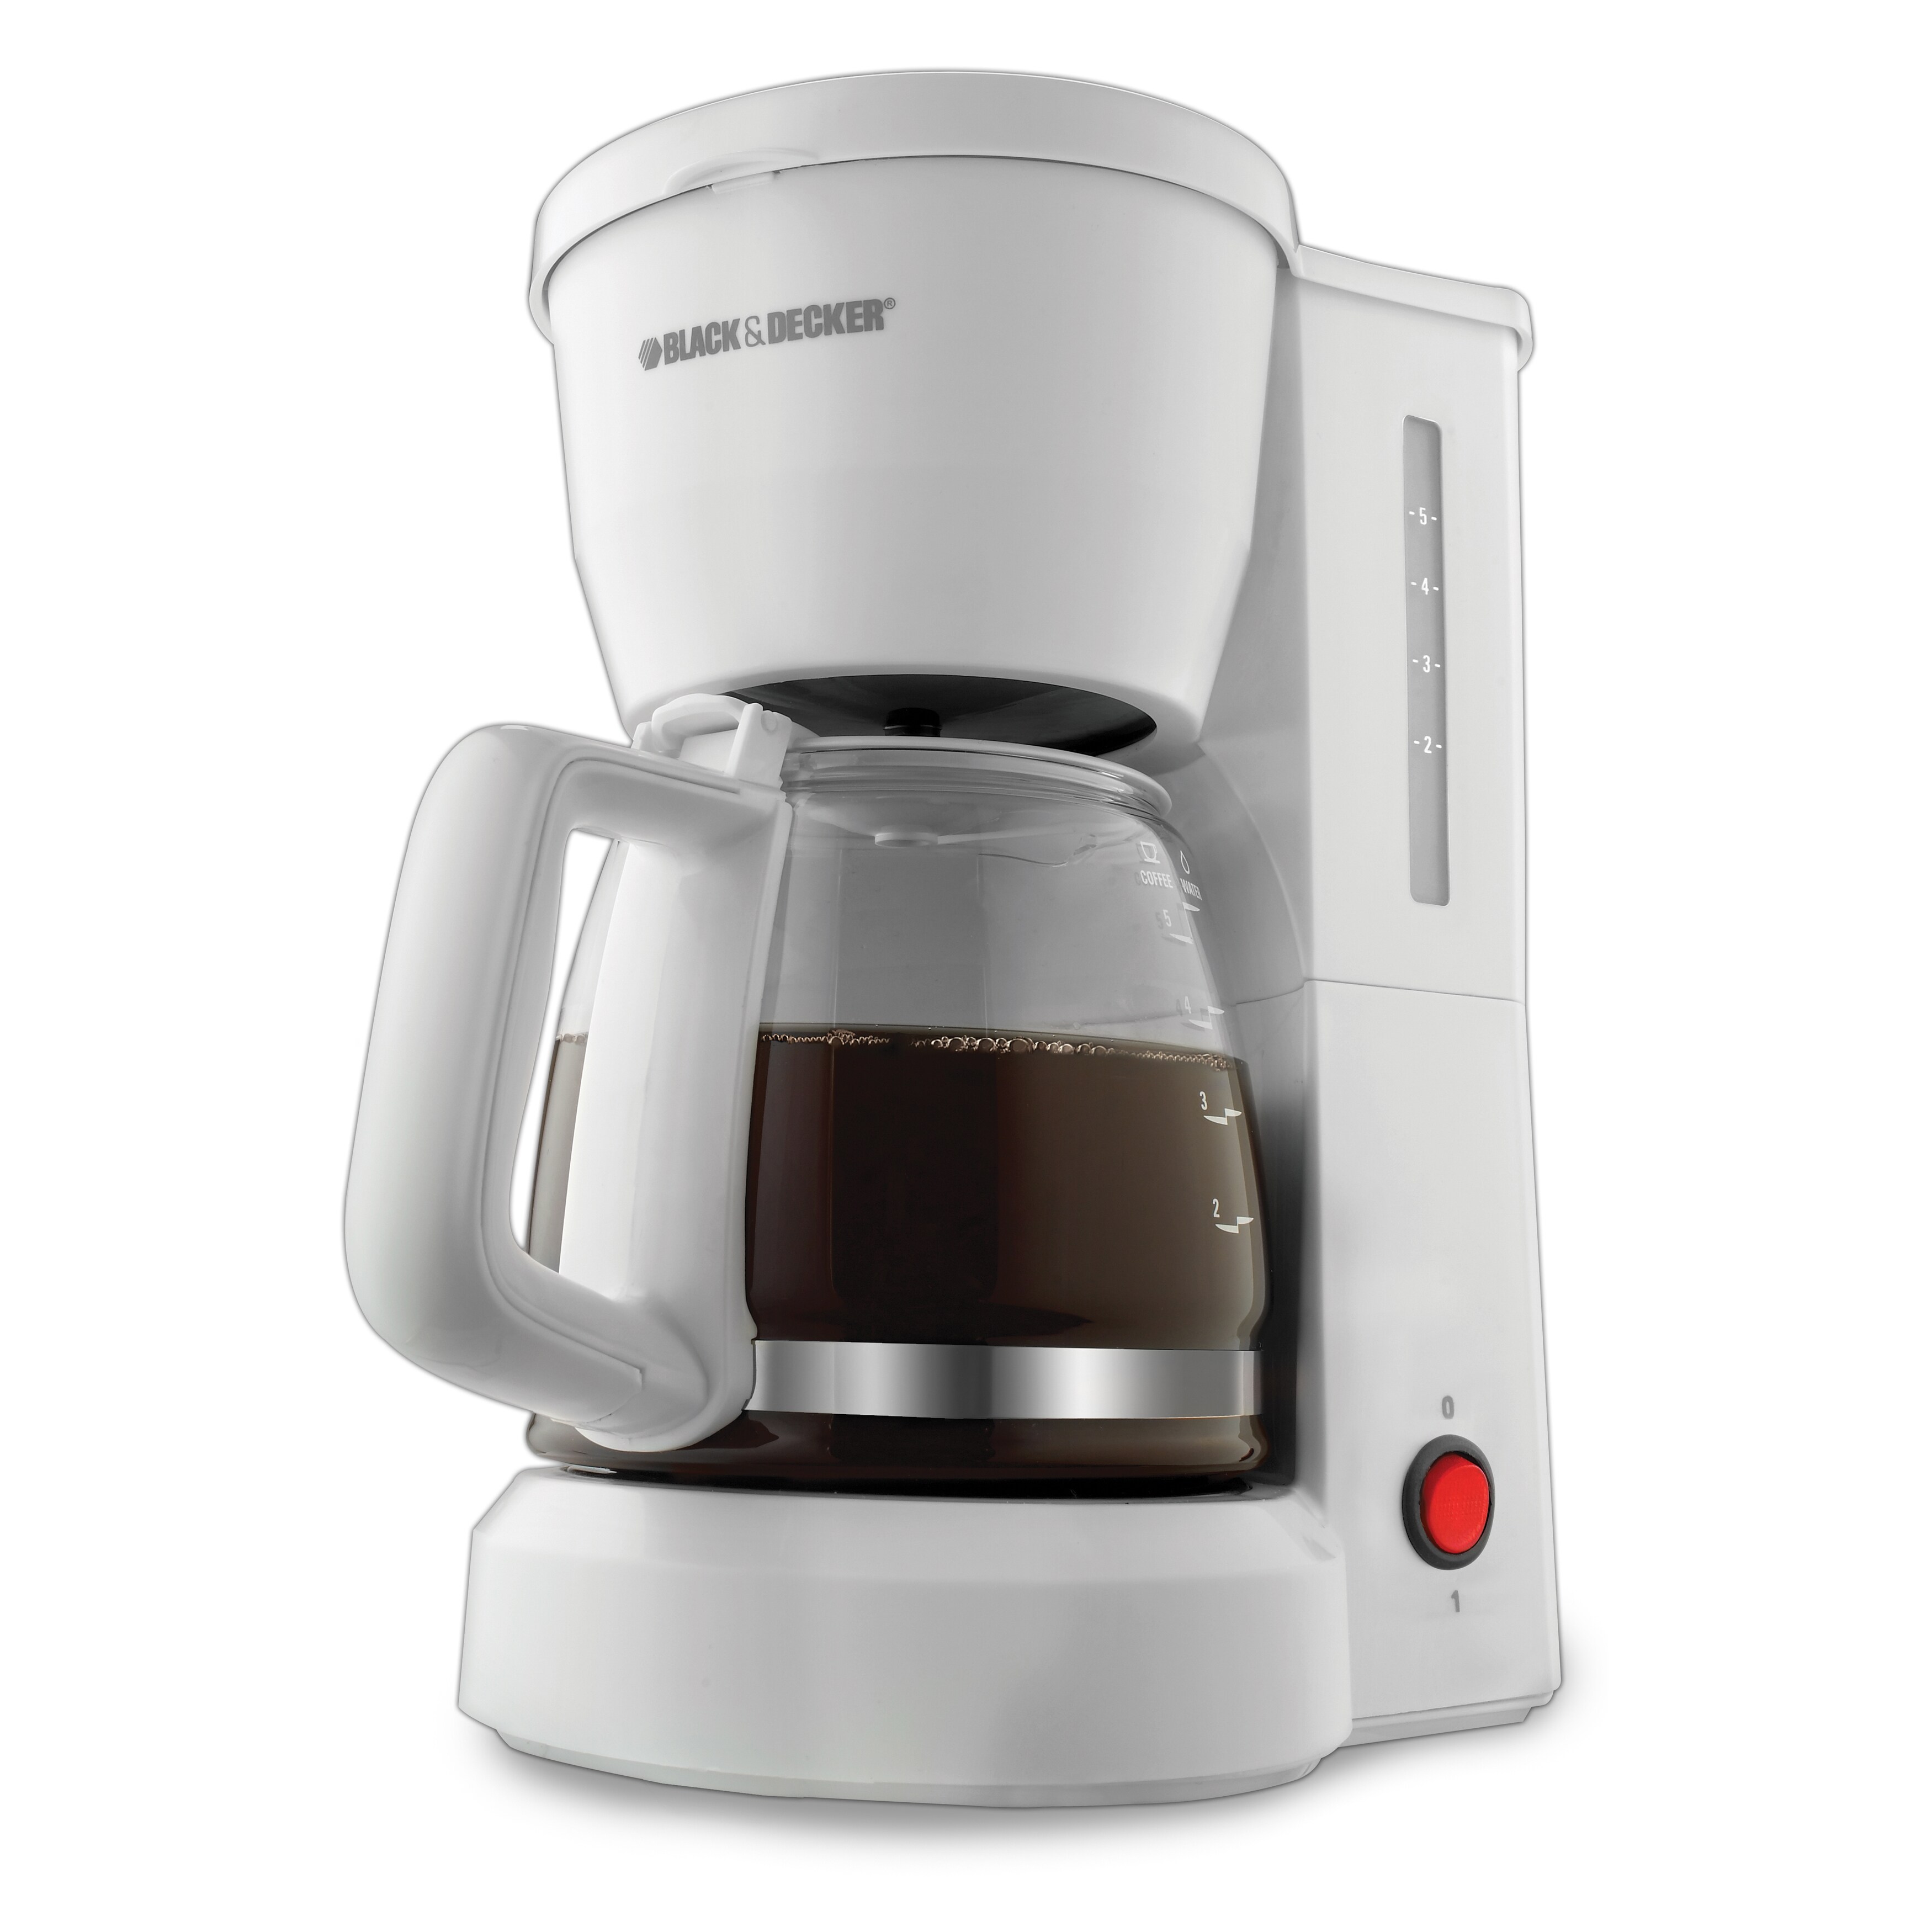 Black & Decker 5 Cups Automatic Coffee Maker Stainless Steel